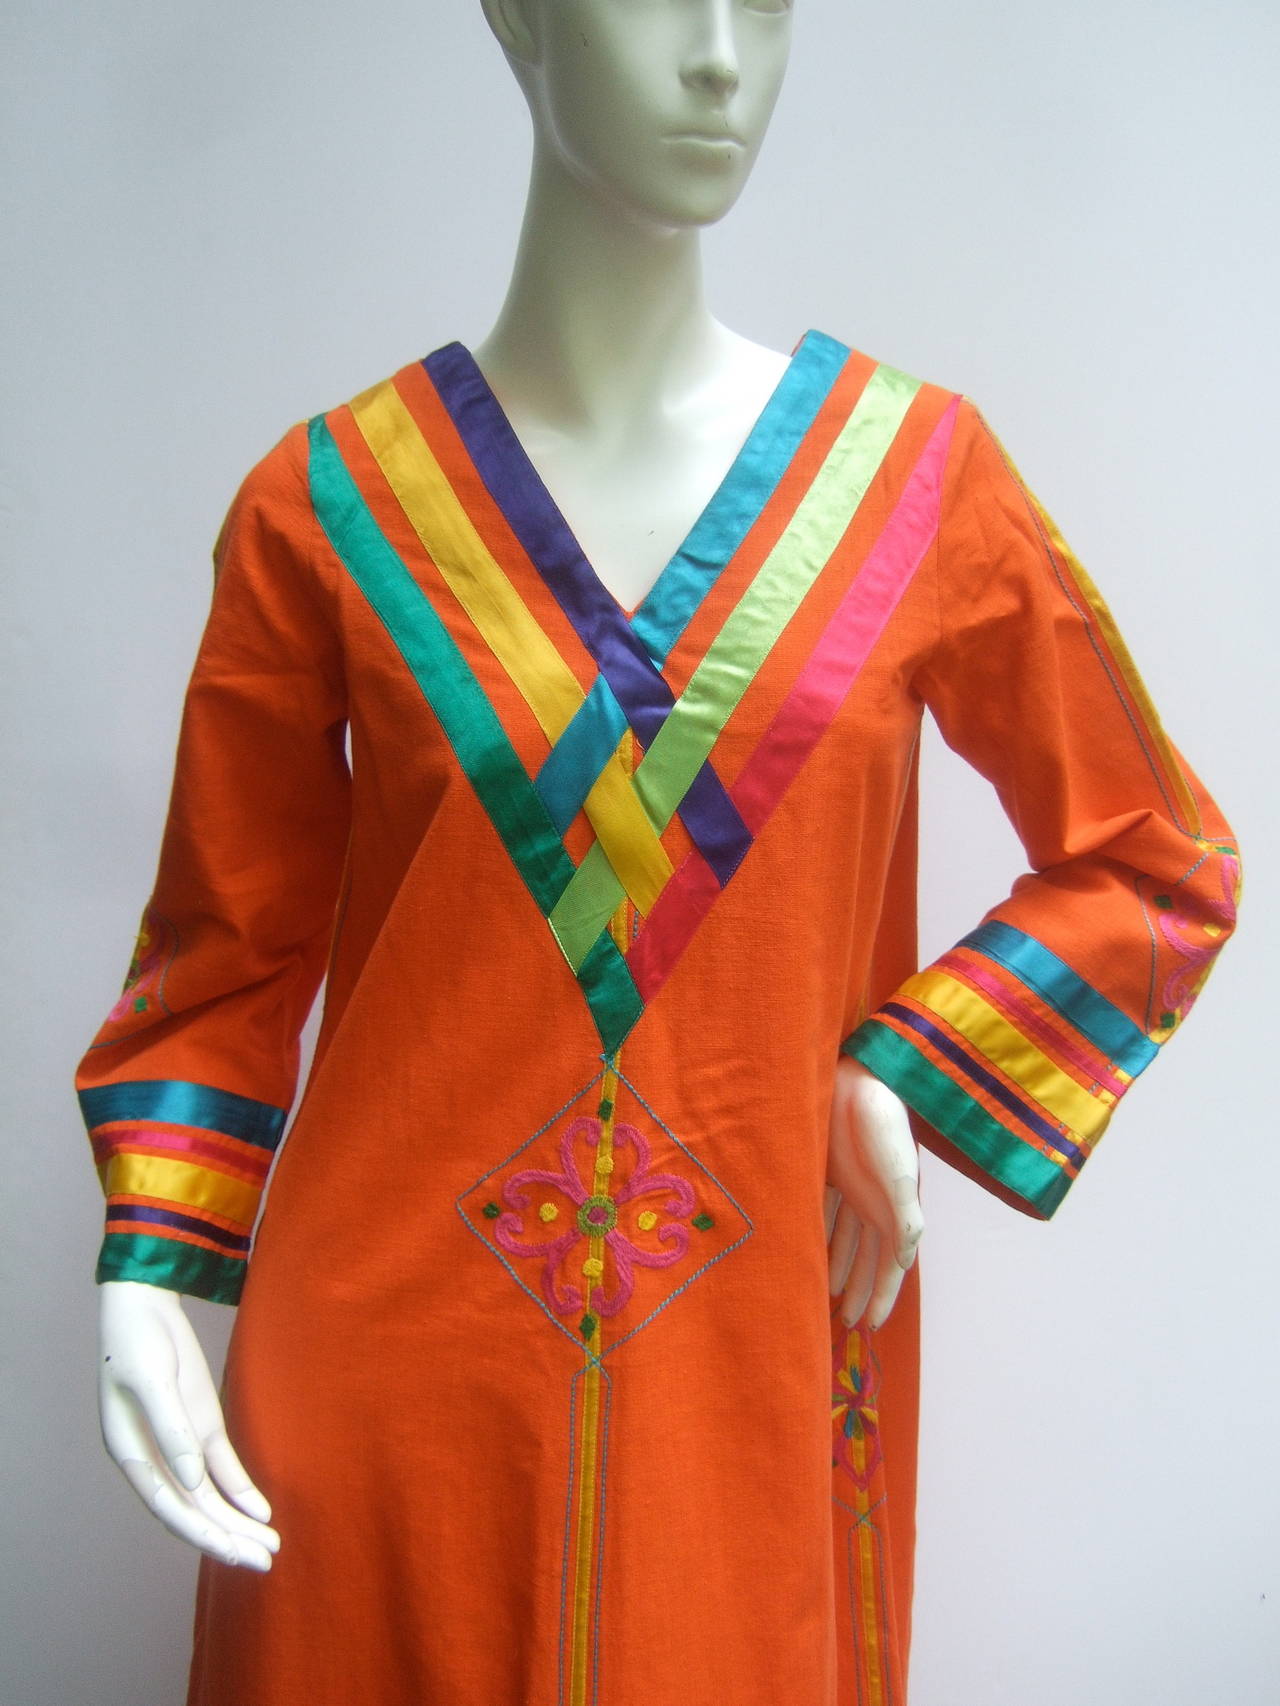 Vibrant Mexican festival tangerine cotton caftan designed by Josefa 
The exotic cotton caftan is embellished with wide colorful satin 
ribbons that frame the v-neck collar, sleeves & circle the hem

The sturdy orange cotton fabric is accented